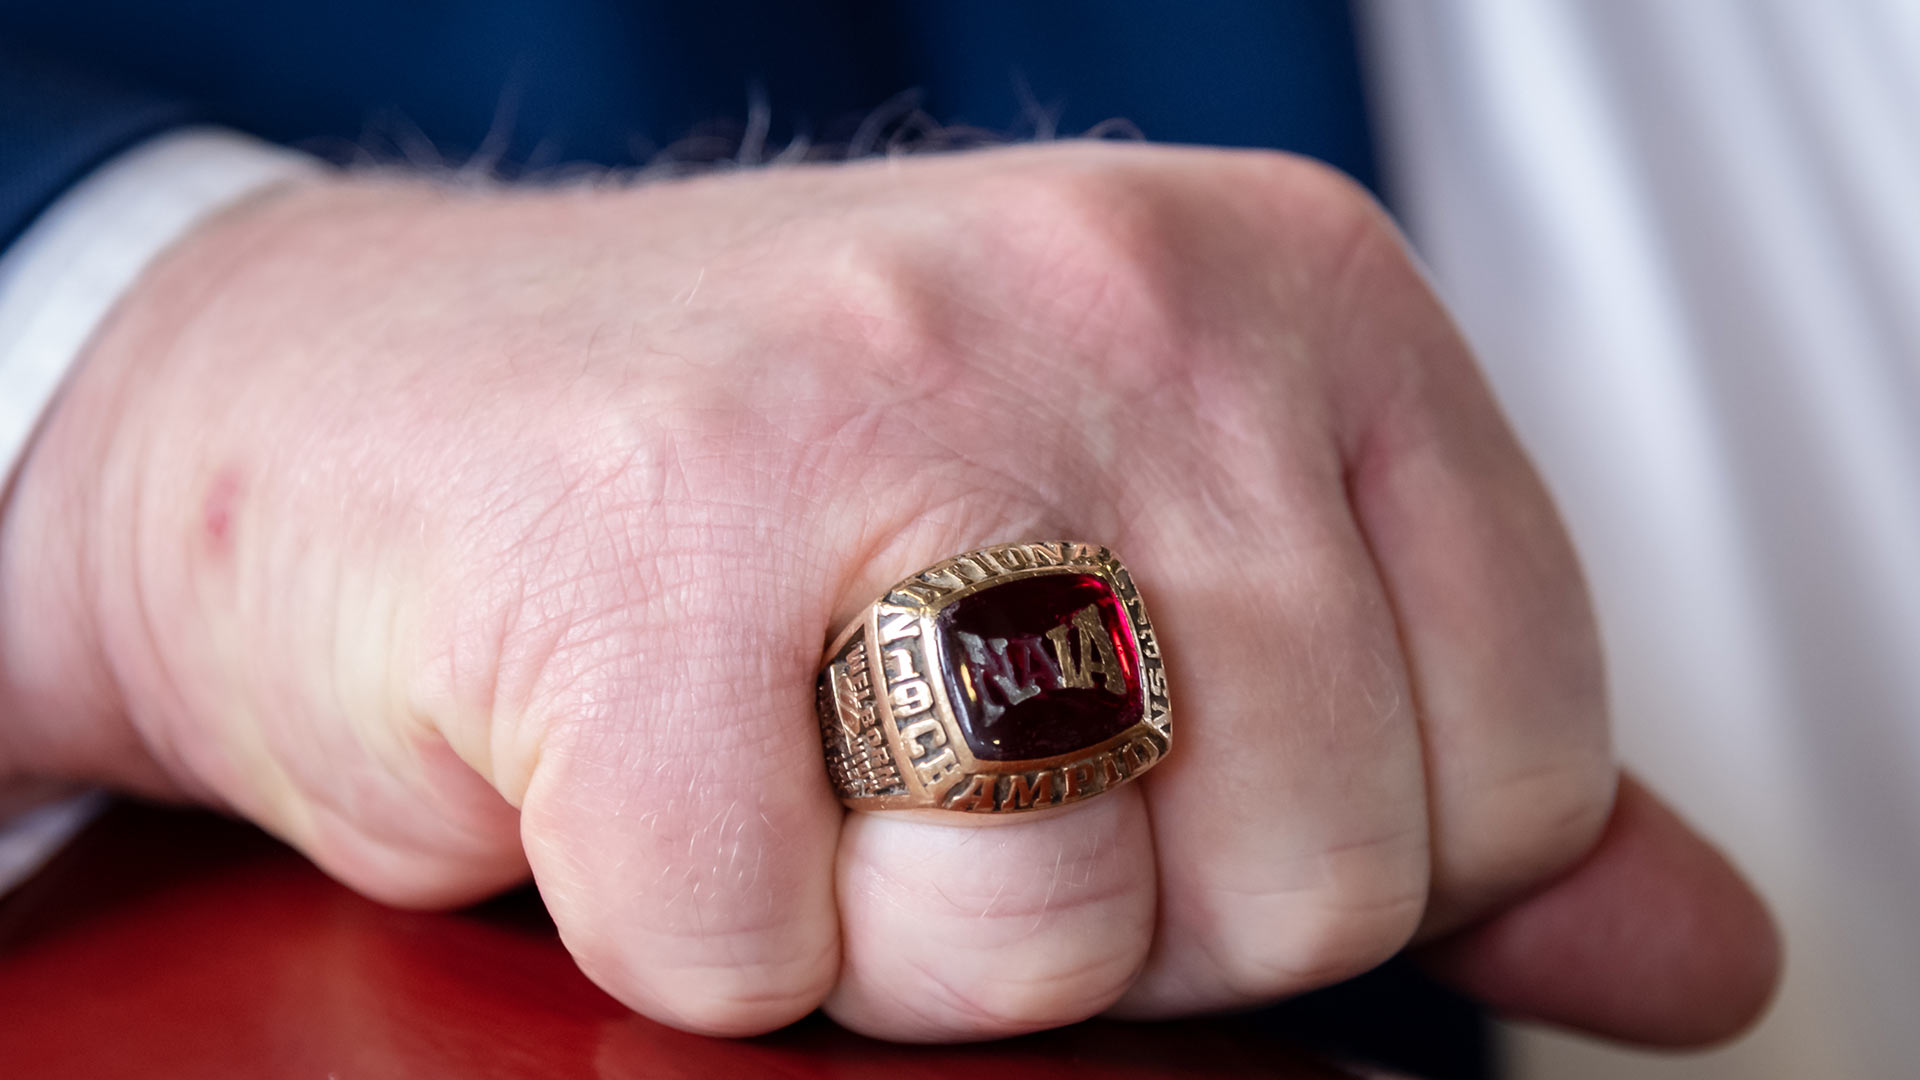 The NAIA champion ring worn by Niel Welborn ‘75, who was the manager on the men’s basketball team.